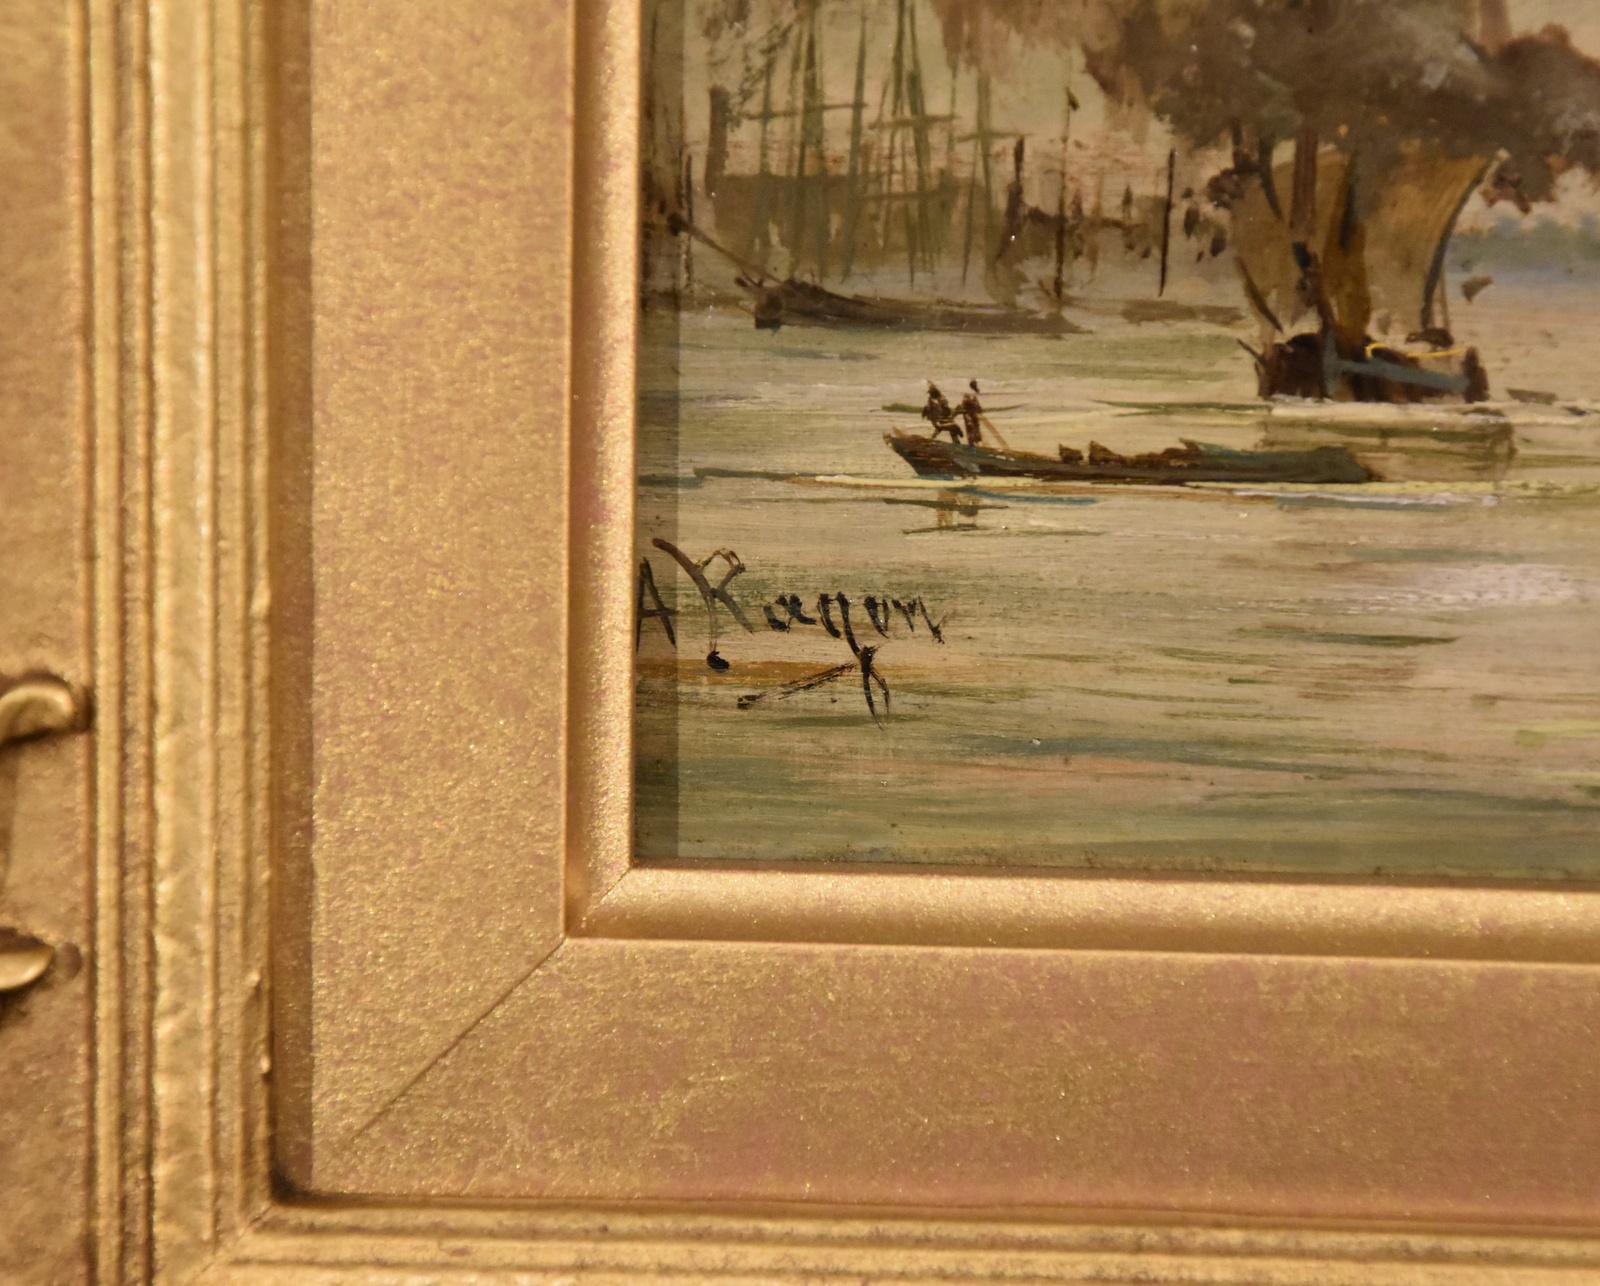 Oil painting by Adolphe Ragon “On the Thames near Woolwich”. Adolphe Ragon 1847 -1924. A Leigh – on -Sea painter of coastal and historical marines. Regular exhibitor in London and Manchester. Oil on Panel. Signed, inscribed with title